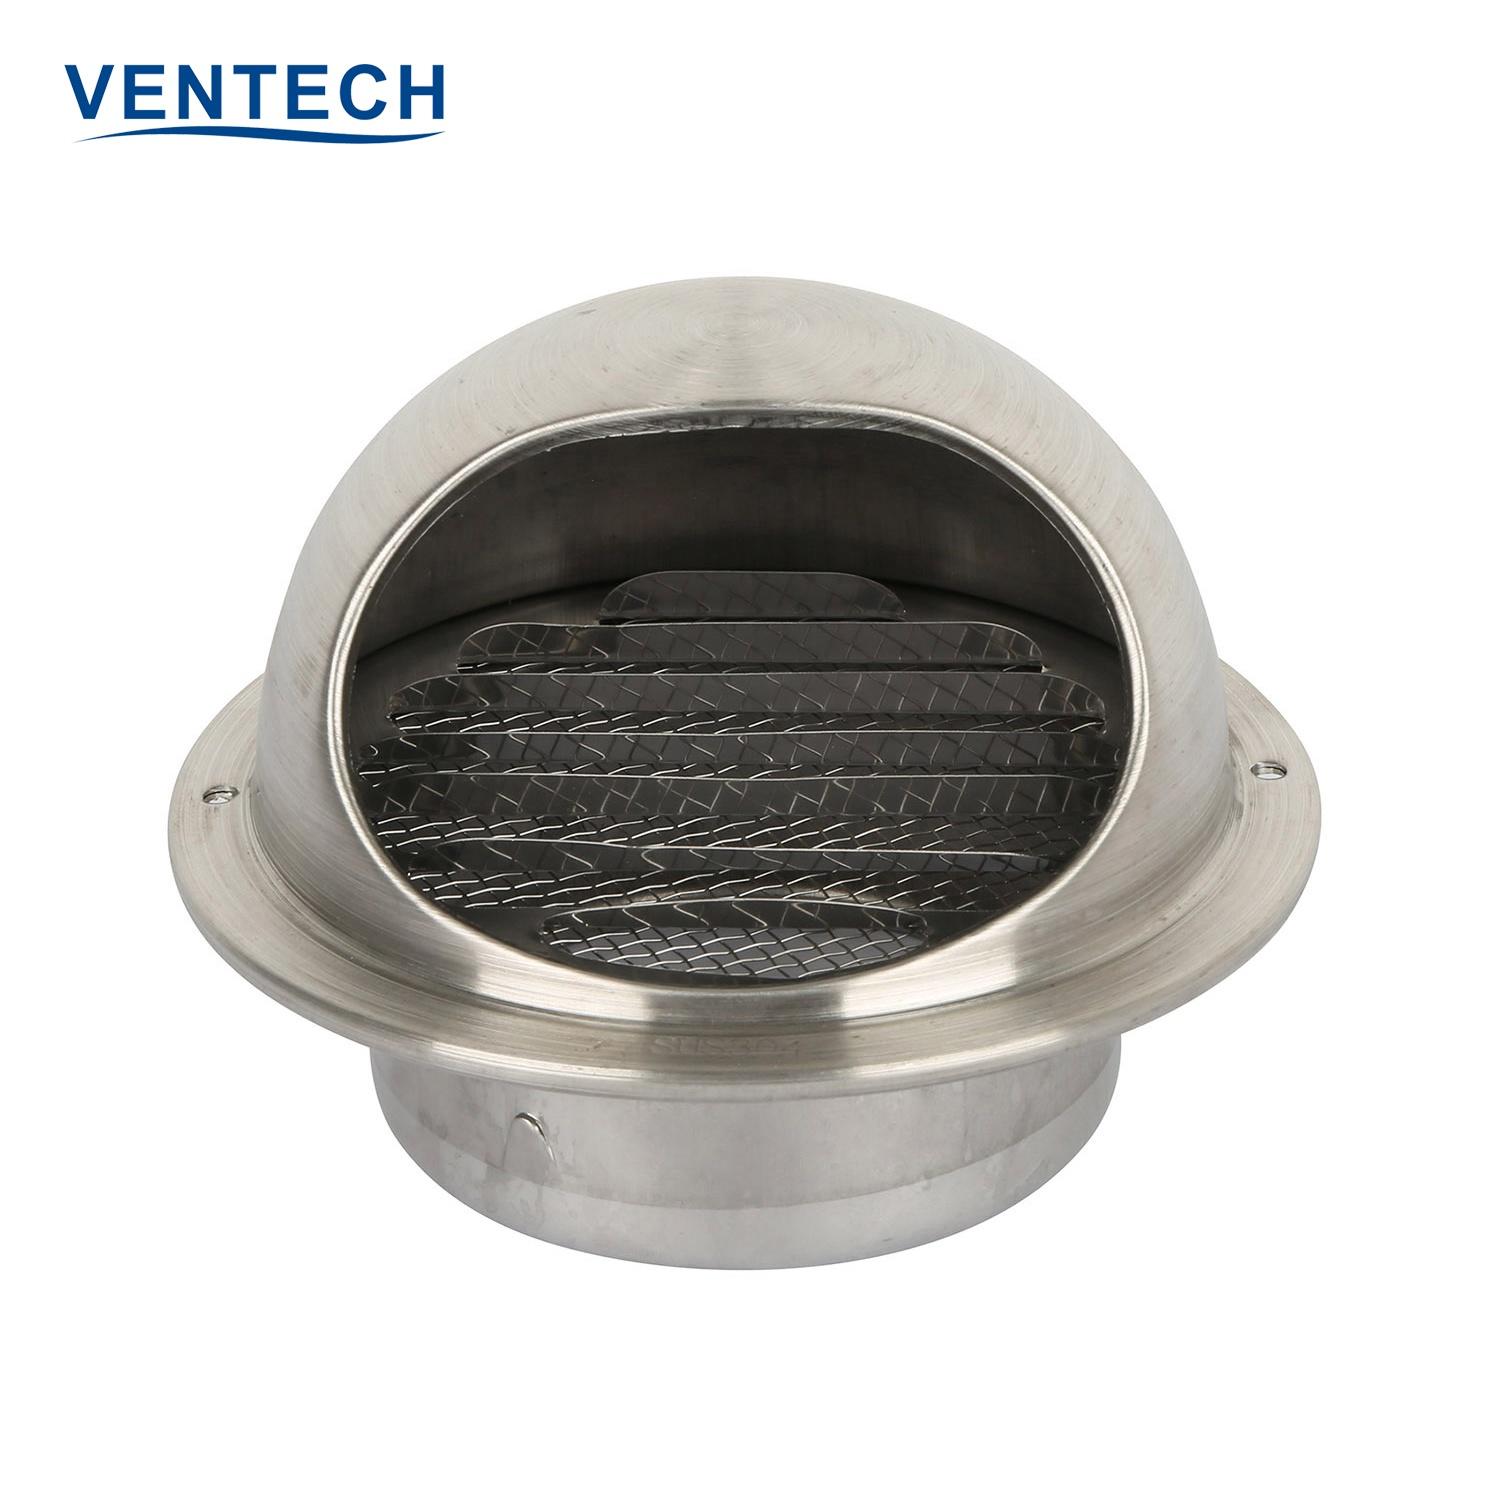 HVAC Aluminum Ventilation Exhaust Air Conditioner Adjustable Stainless Steel Louver Vent Grill Vent Cover Ball Weather Louvers